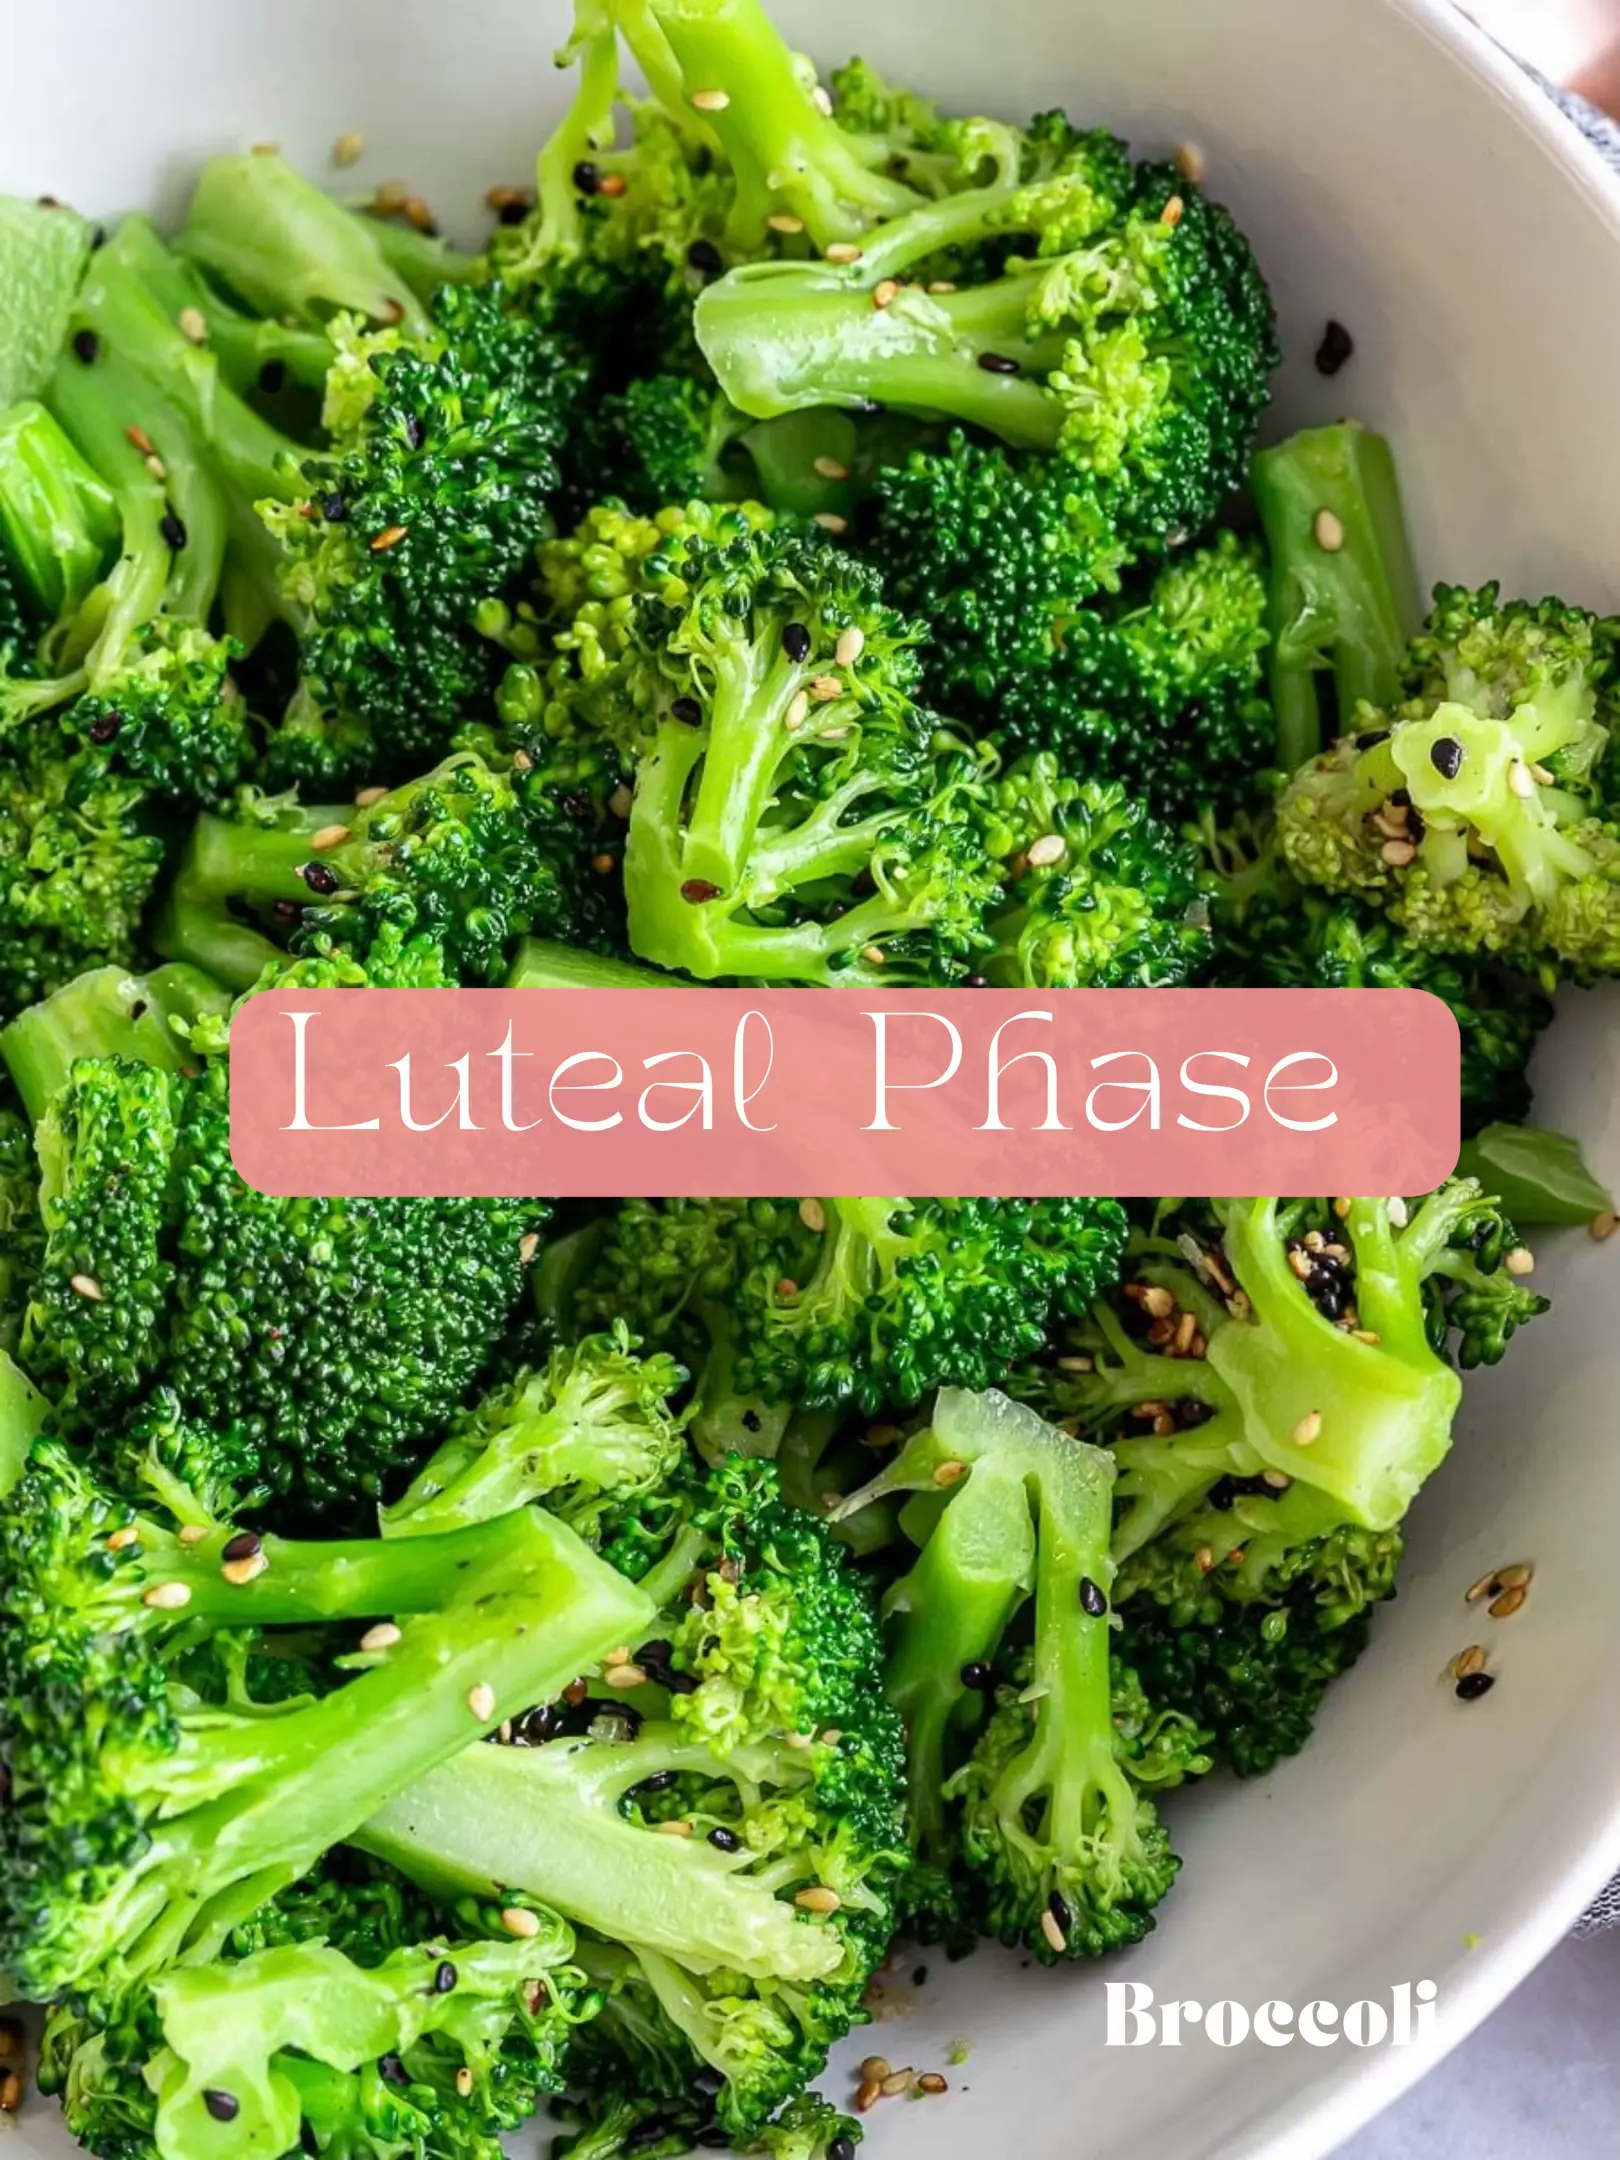 Cycle Syncing in the Luteal Phase  Workout and Food Ideas - Hollye Makes a  Home